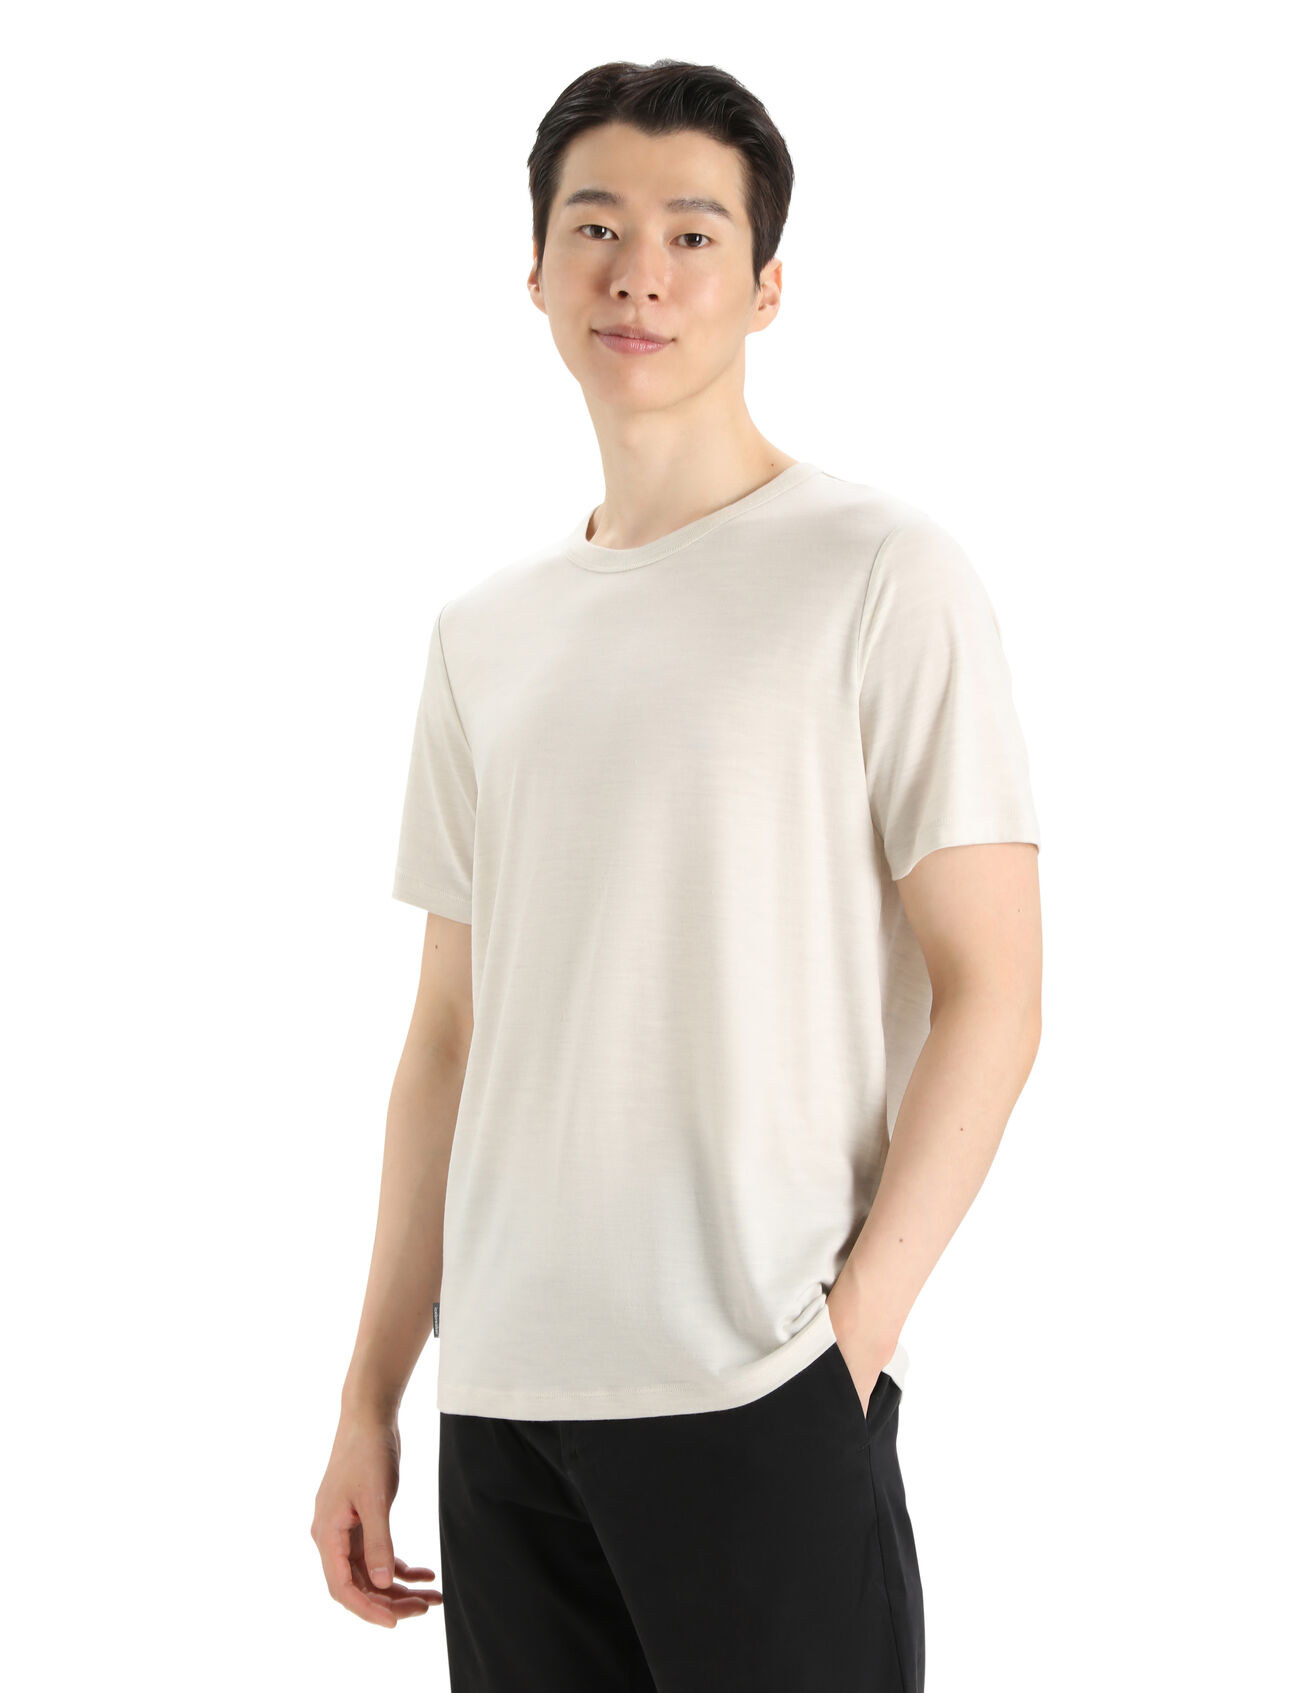 Mens MerinoFine™ Short Sleeve T-Shirt A classic and versatile everyday T-shirt made with 15.5 micron, 100% pure merino wool fibers, the MerinoFine™ Jersey Short Sleeve Tee offers up a luxuriously soft feel that’s naturally breathable and odor resistant.